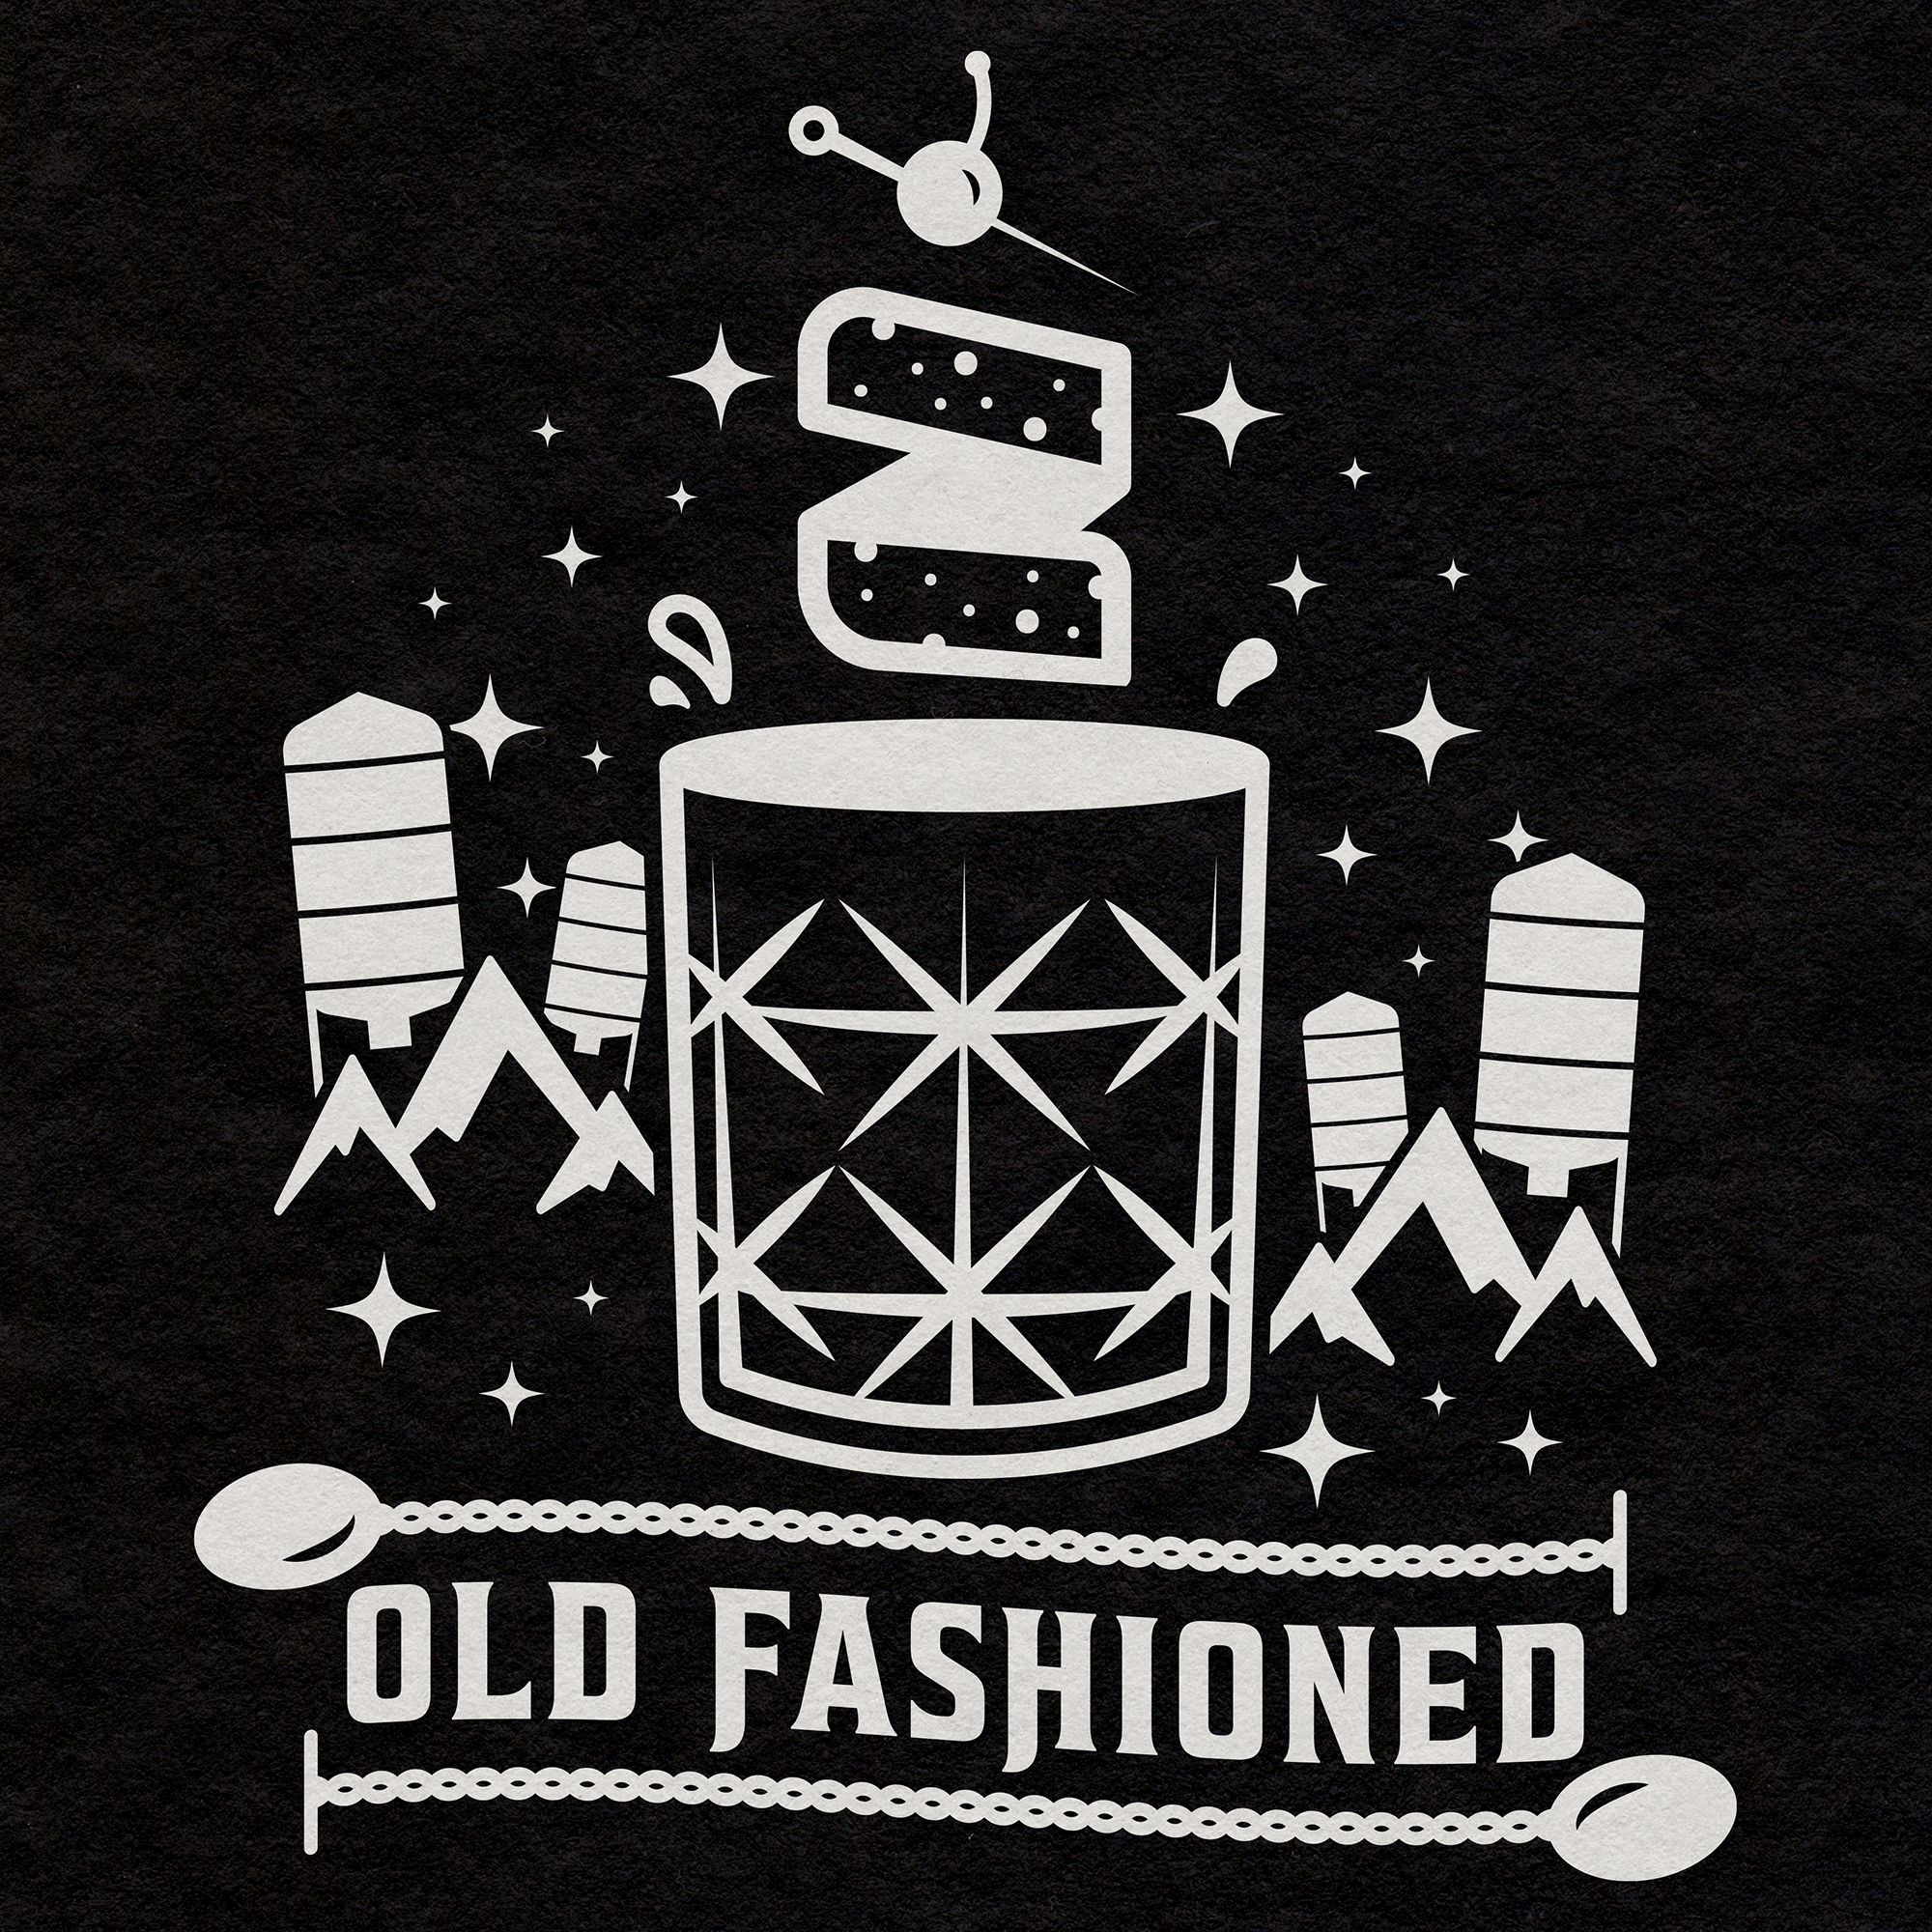 OldFashioned_DesignOnly.png